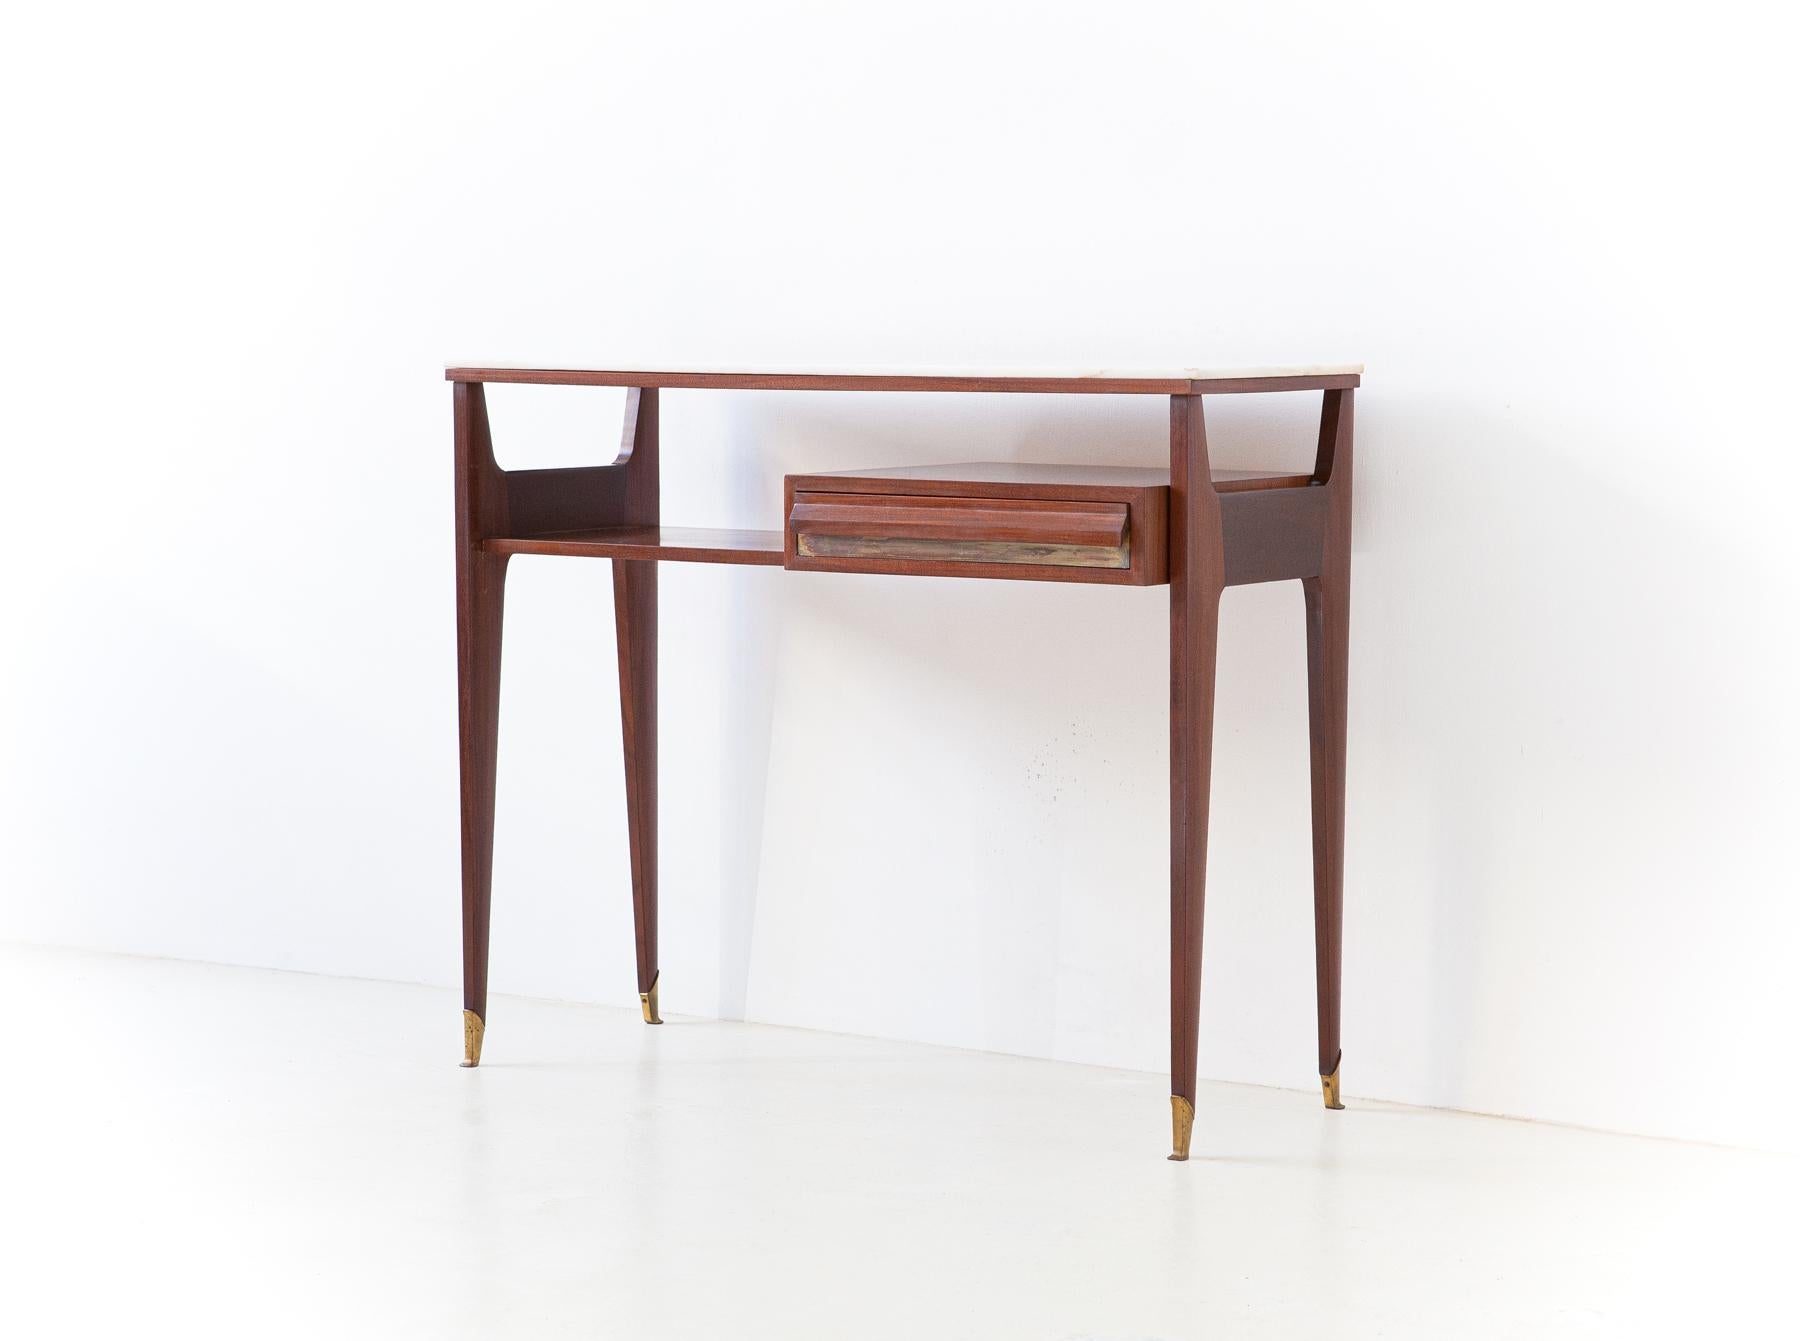 Italian console table with drawer, manufactured during the 1950s

This Mid-Century Modernist console is crafted from solid mahogany wood with brass details with its beautiful original patina and marble top. It has a drawer on the right.
Its